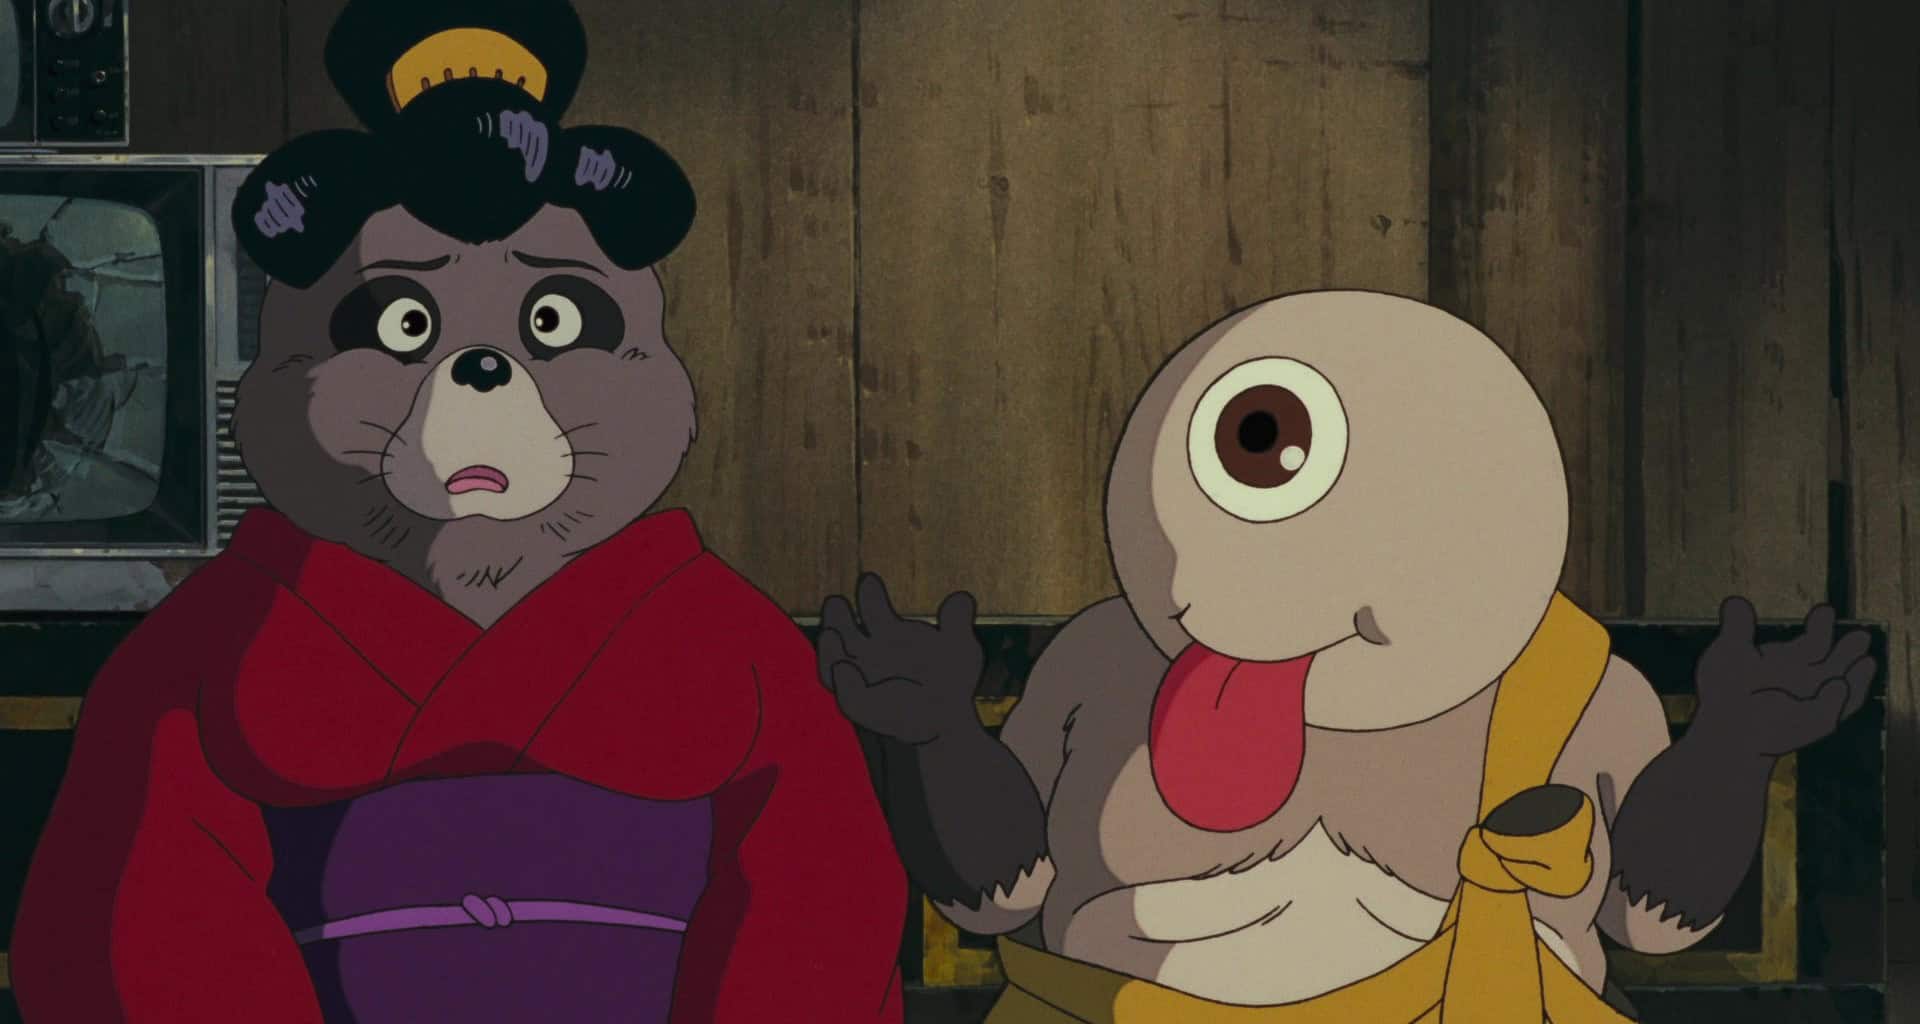 An animated raccoon and a cyclops in this image from Studio Ghibli.